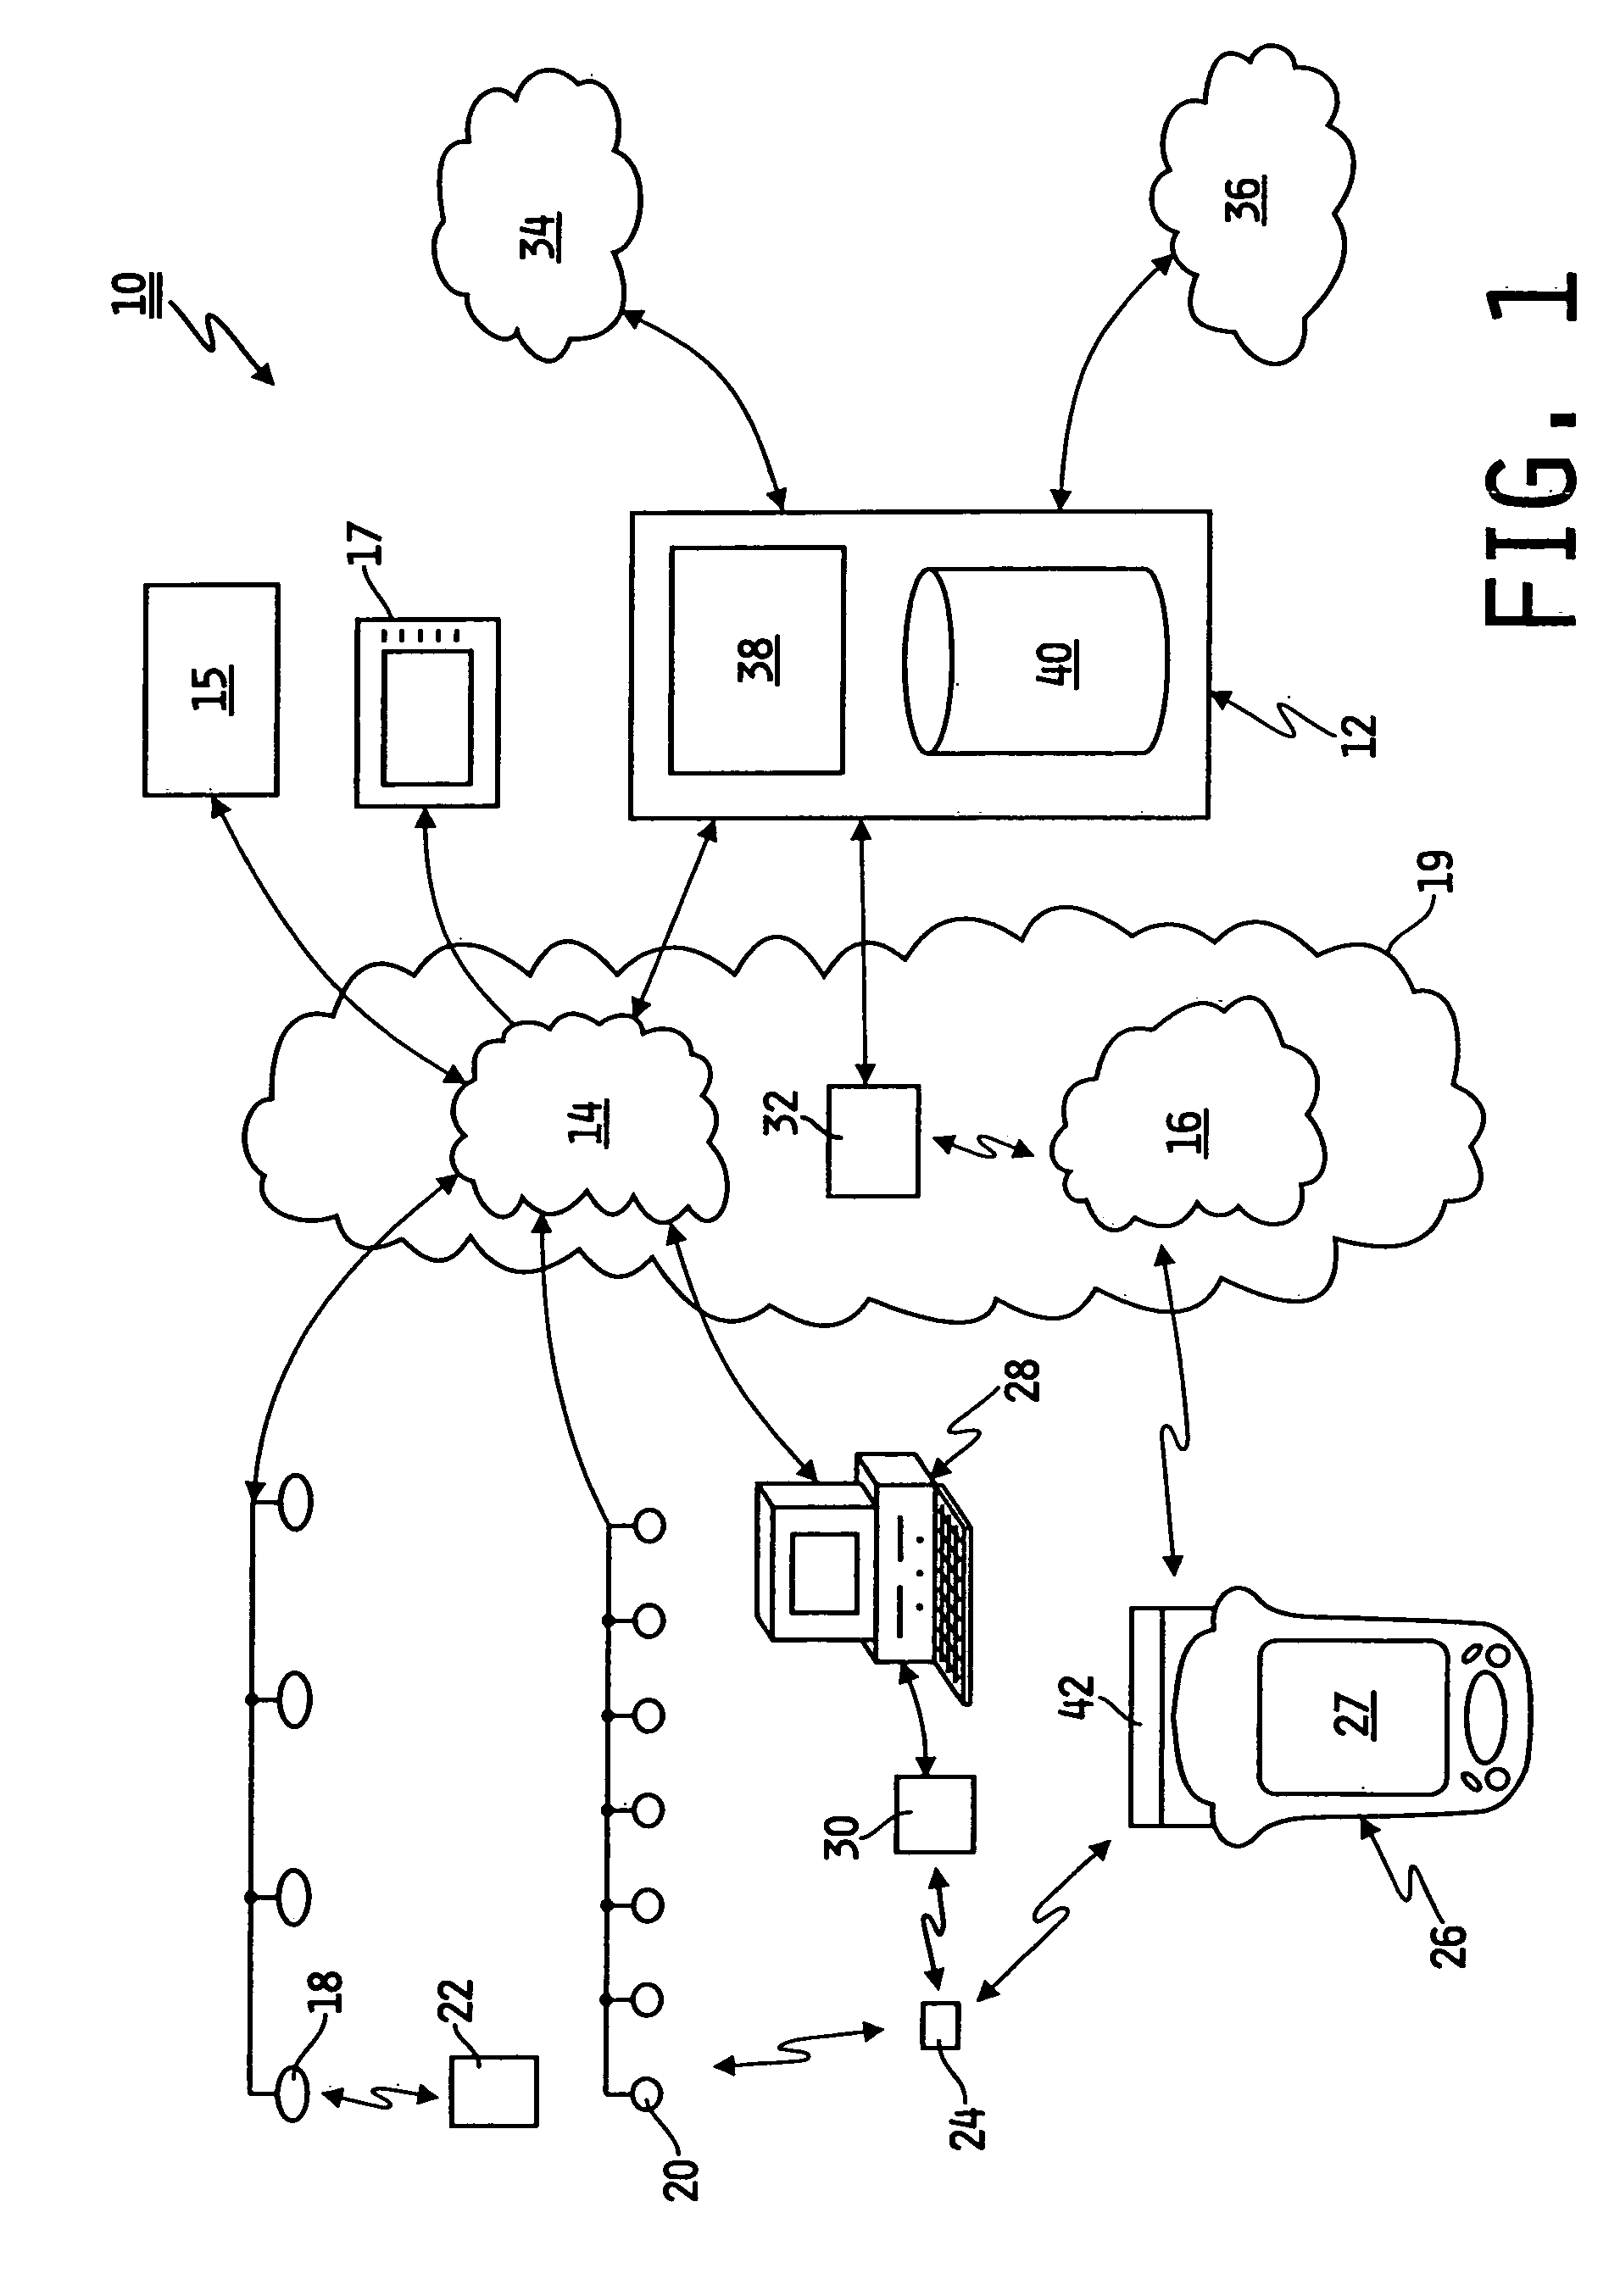 Universal communications, monitoring, tracking, and control system for a healthcare facility